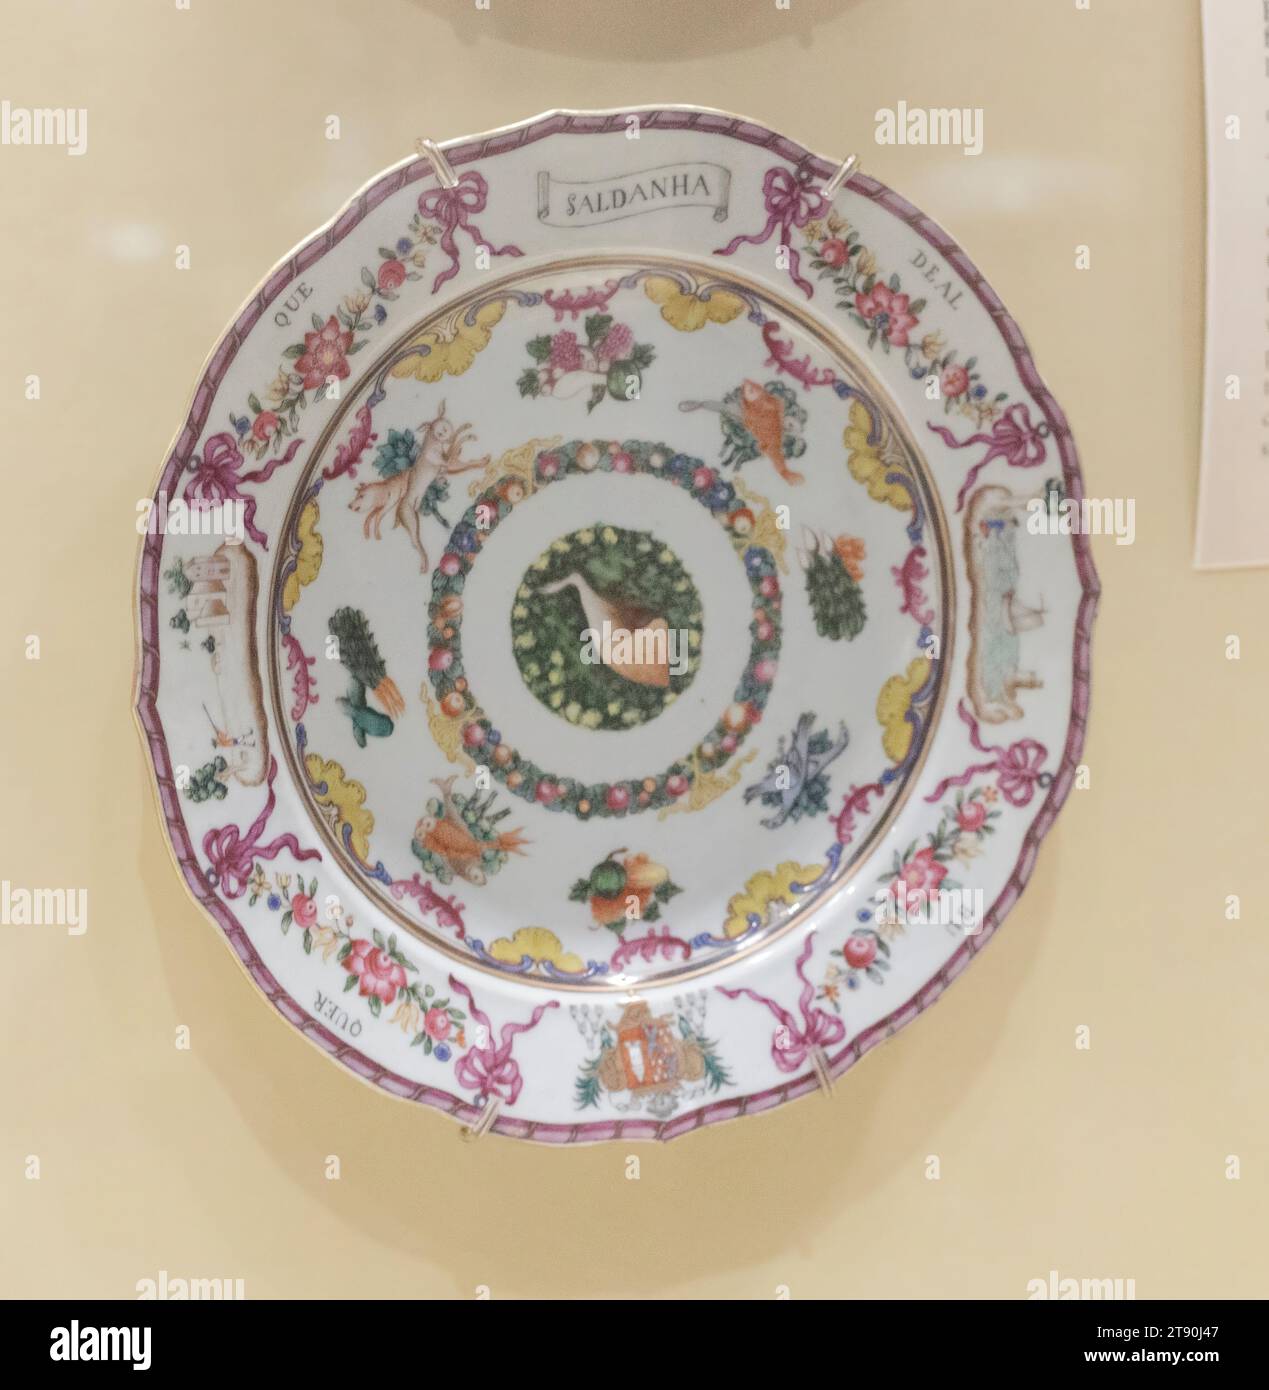 Plate with the arms of Saldanha for the Portuguese market, c. 1760-1770, 1 x 9 3/16 in. (2.54 x 23.34 cm), Porcelain, China, 18th century, This plate formed part of a large dinner service commissioned by the Saldanha de Albuquerque family of Portugal. This service is one of the most unusual Chinese Export services to have been produced during the eighteenth century. Typical services were decorated with family coats of arms, designs copied from European prints, Chinese-style figures or floral motifs. Rather than emphasizing the family's coat of arms, the service celebrates food: a large ham Stock Photo